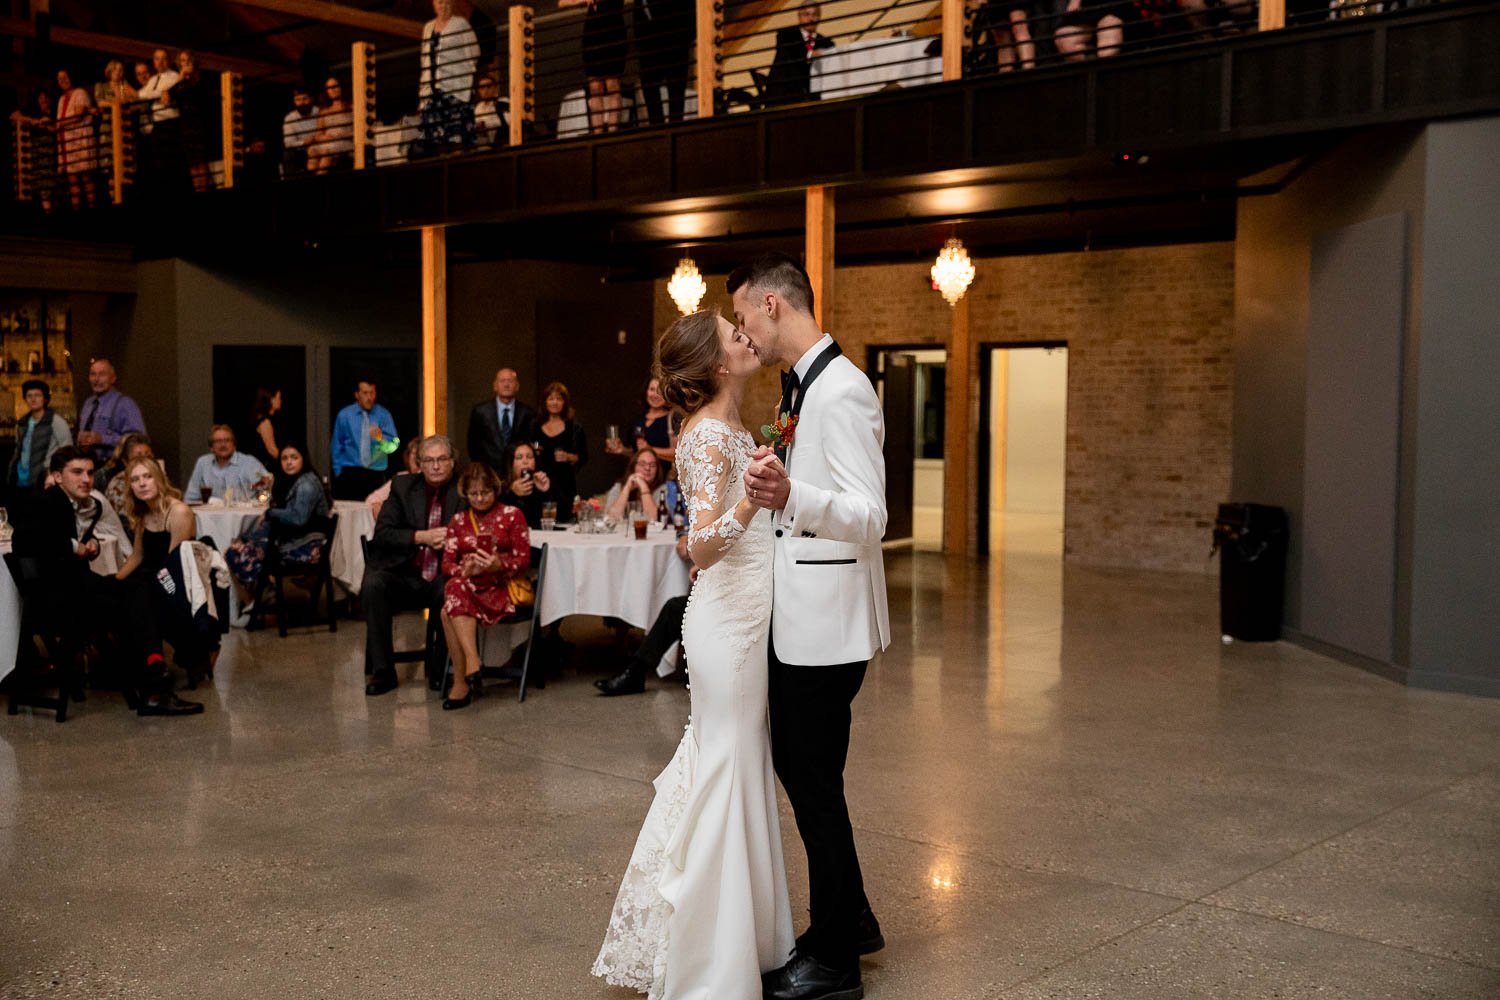 edding couple's first dance at fall fete of wales wedding